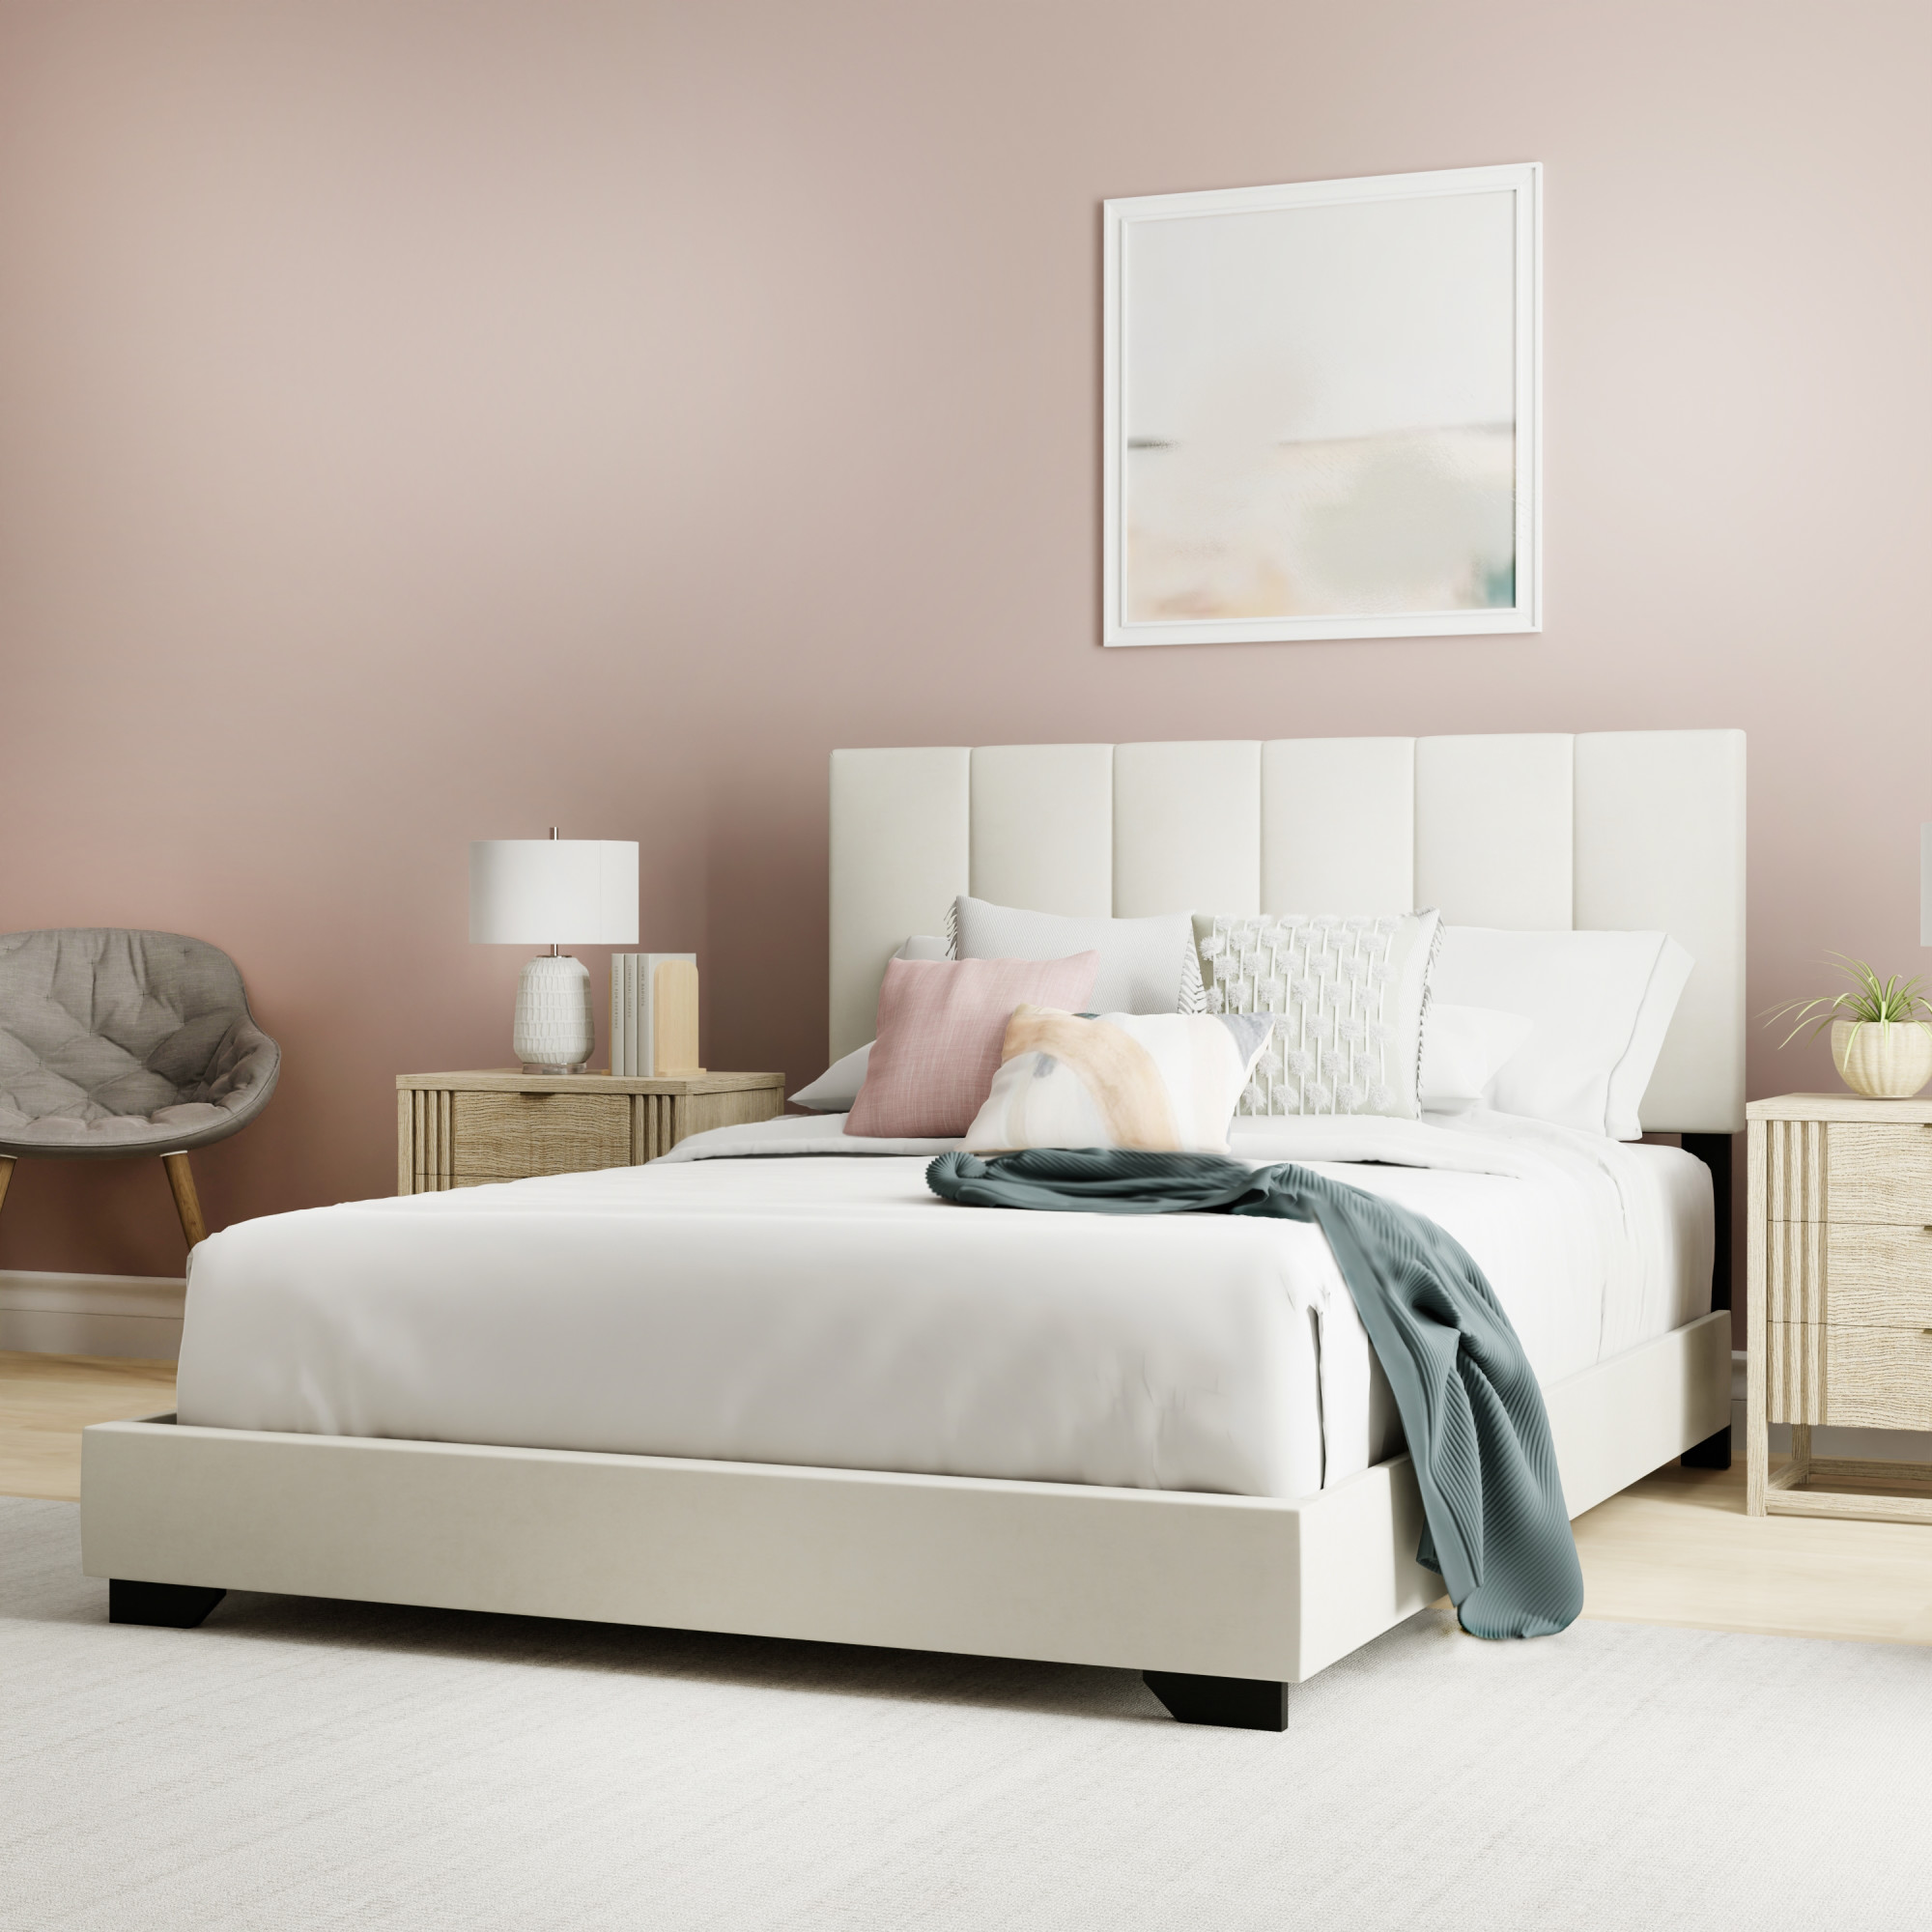 Reece Channel Stitched Upholstered Full Bed, Ivory, by Hillsdale Living Essentials - image 5 of 17